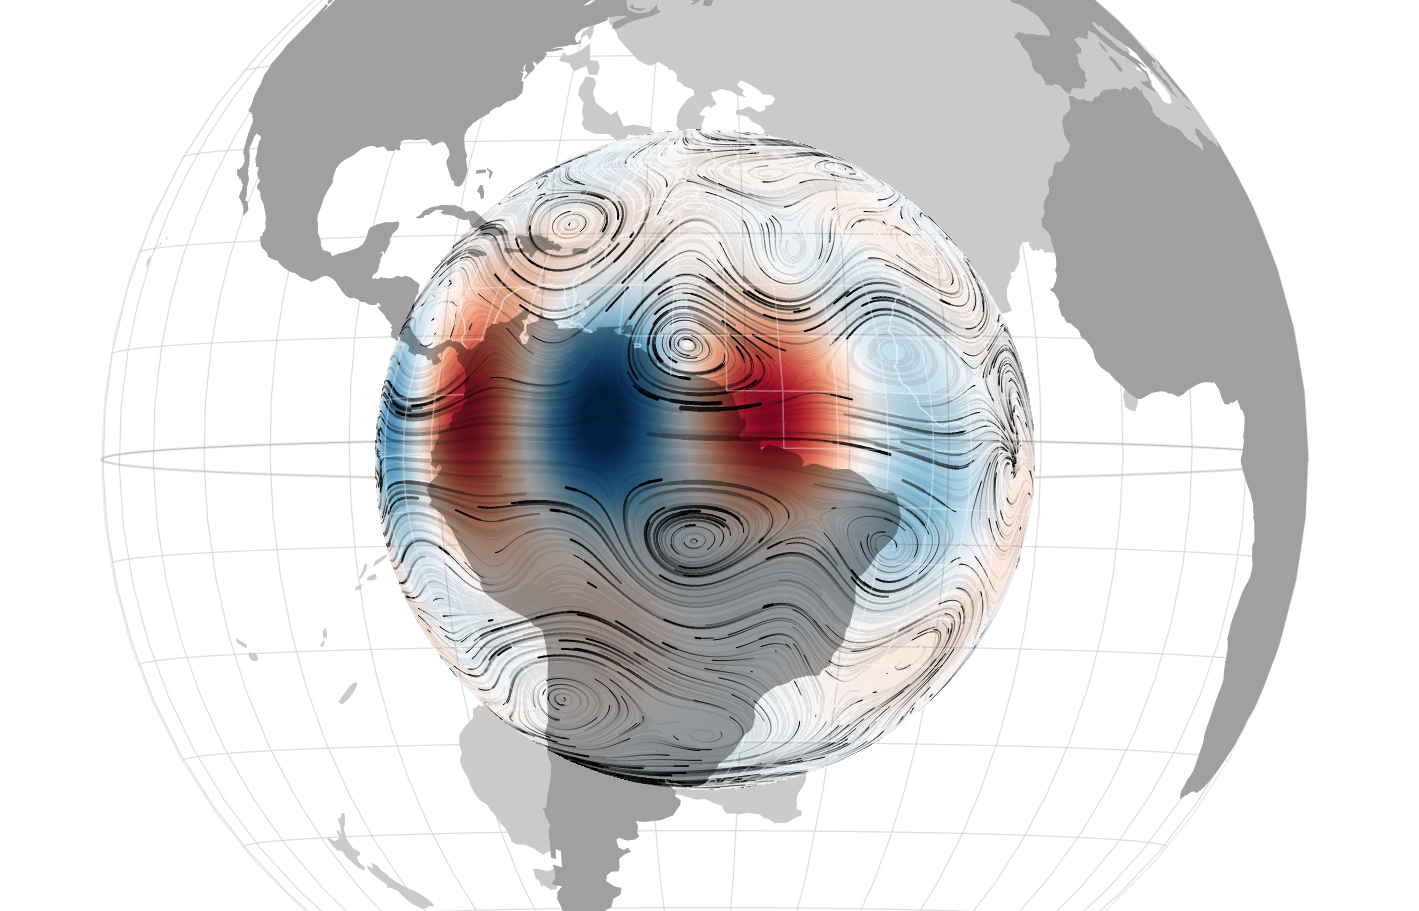 The magnetic field changes associated with the waves were strongest near the Earth's equator.